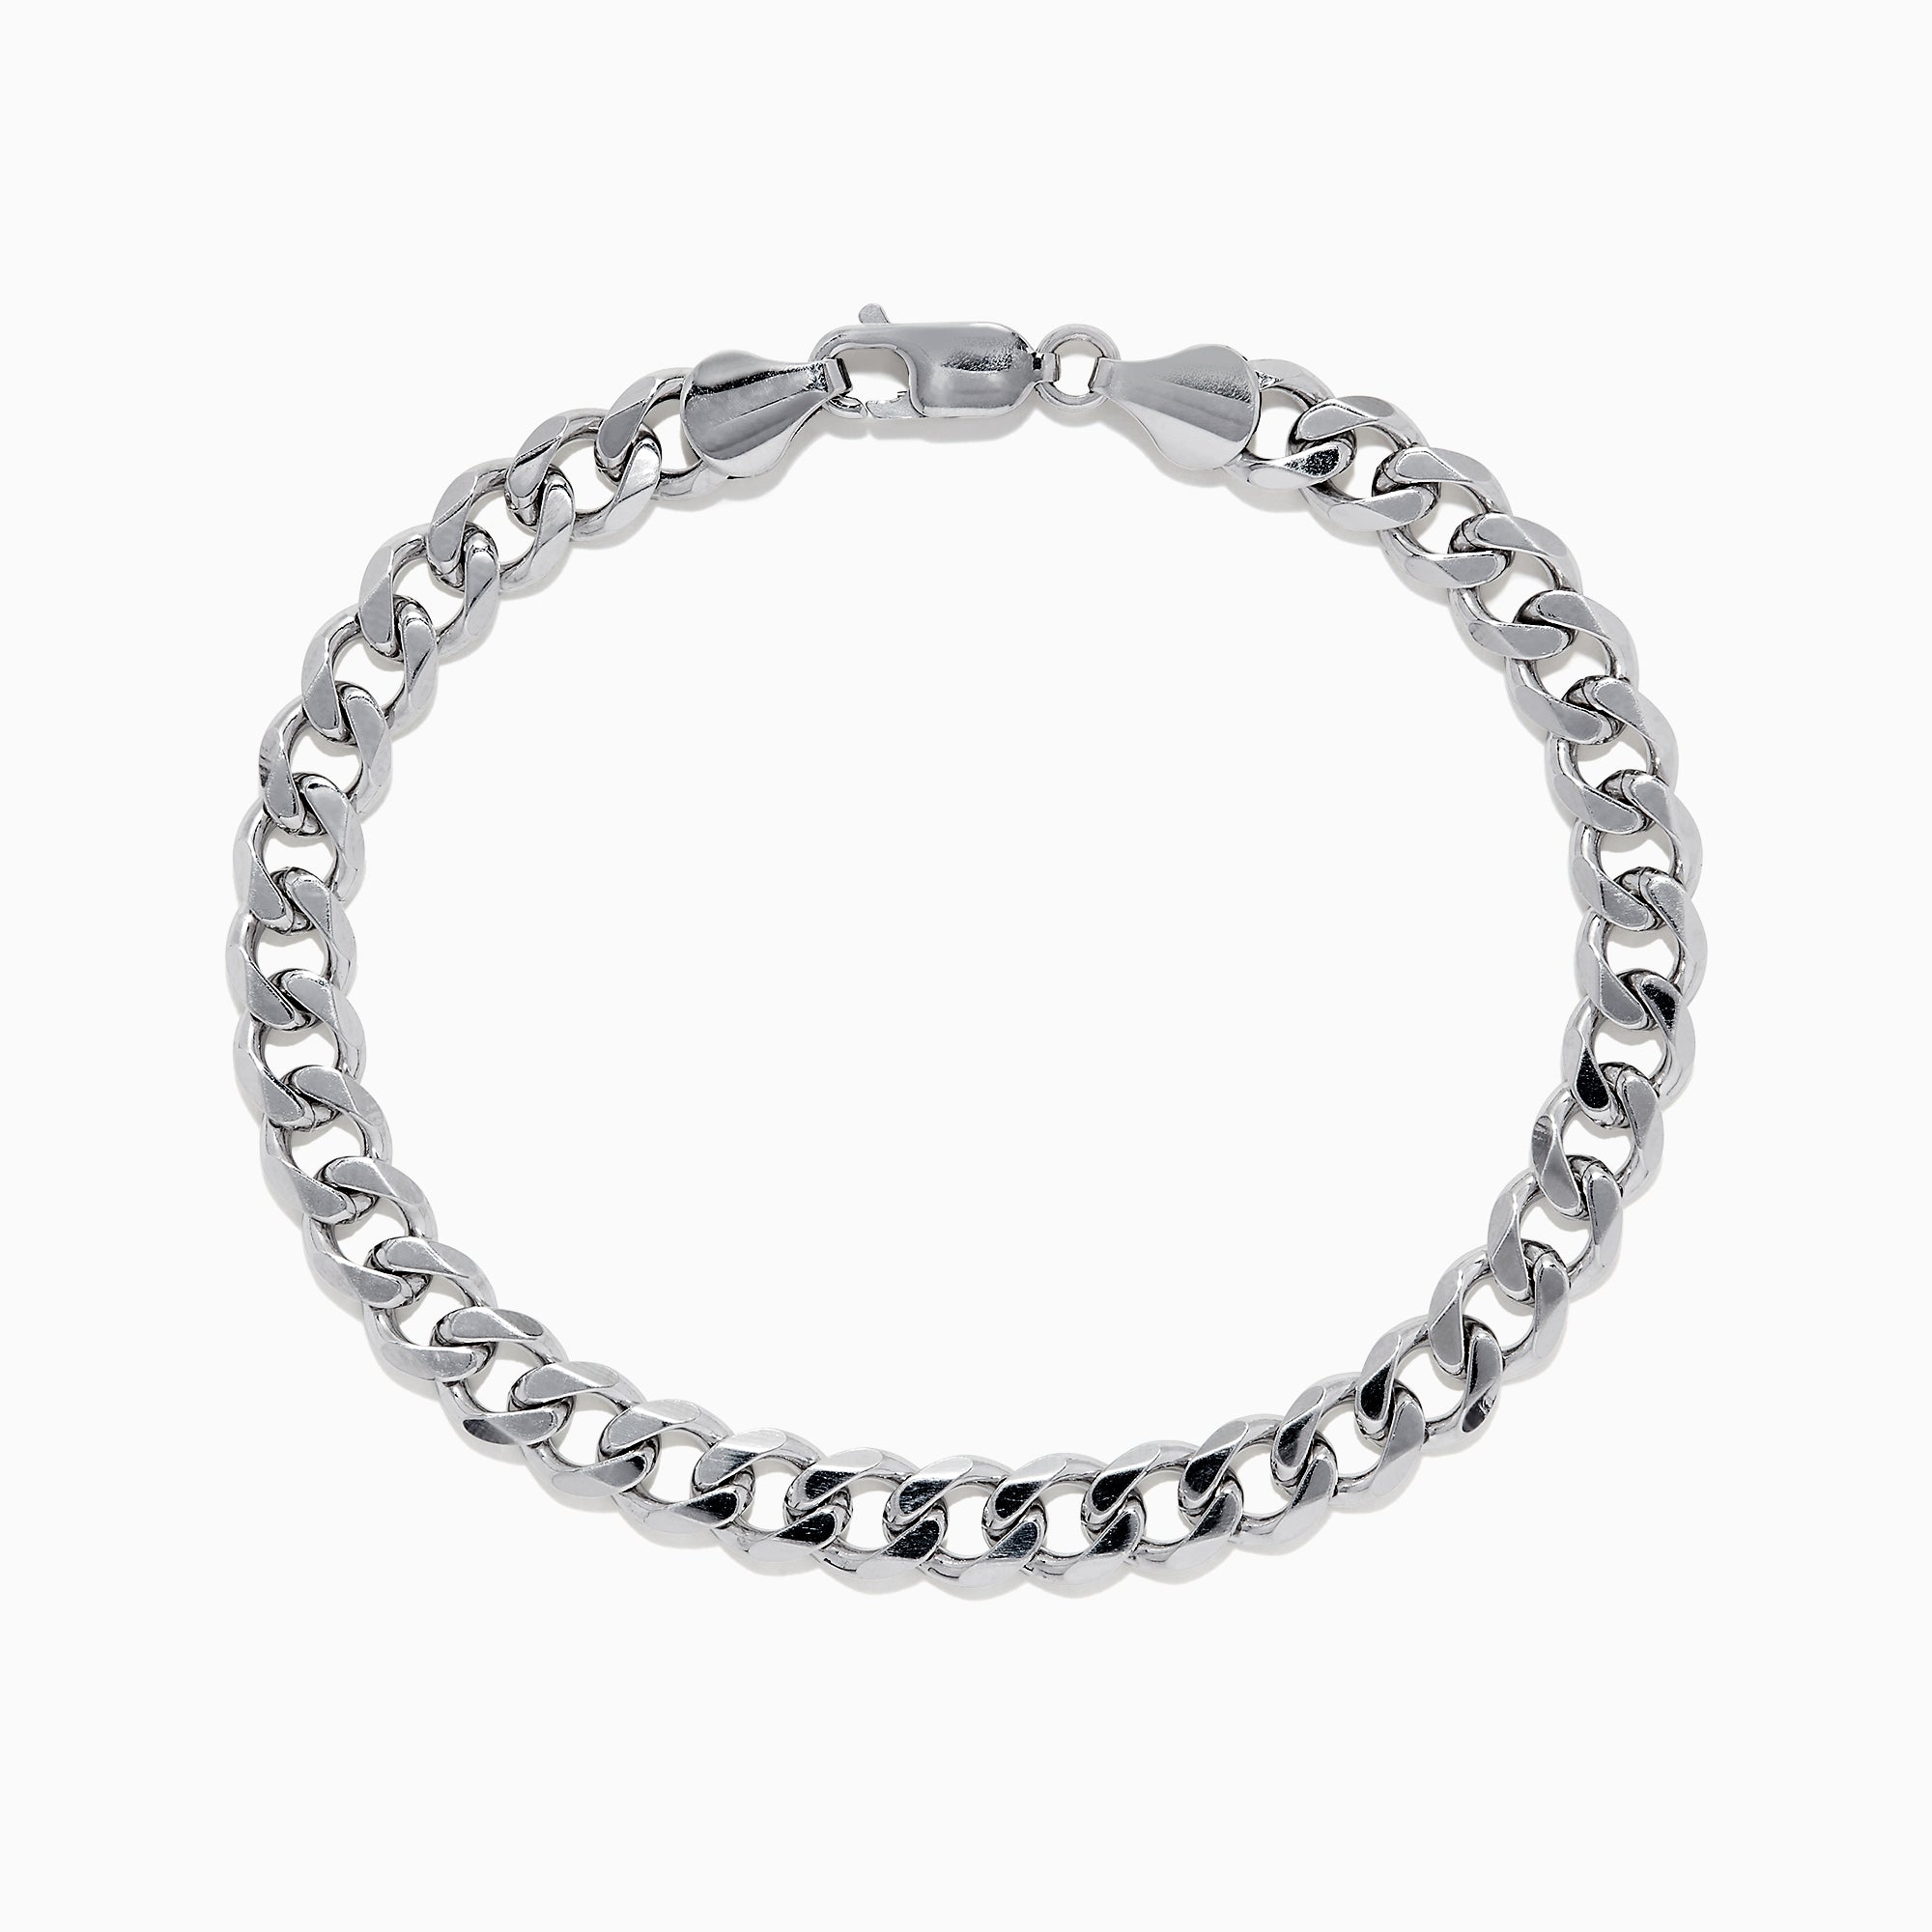 Amazon.com: Miabella 925 Sterling Silver Italian 12mm Solid Diamond-Cut  Cuban Link Curb Chain Bracelet, Jewelry For Men Made in Italy (Length 8  Inches): Clothing, Shoes & Jewelry